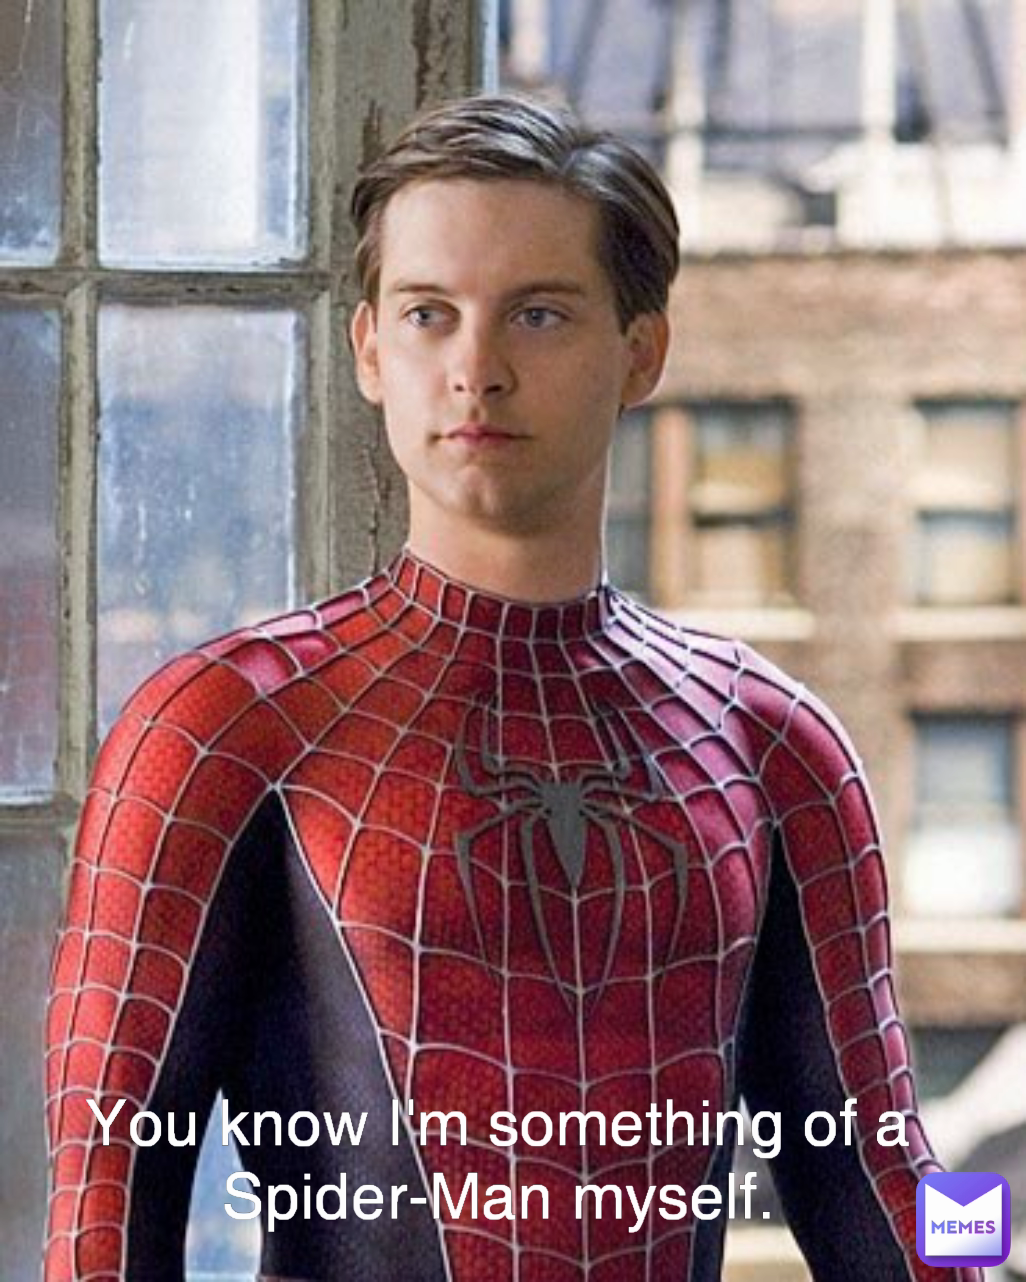 You know I'm something of a Spider-Man myself.